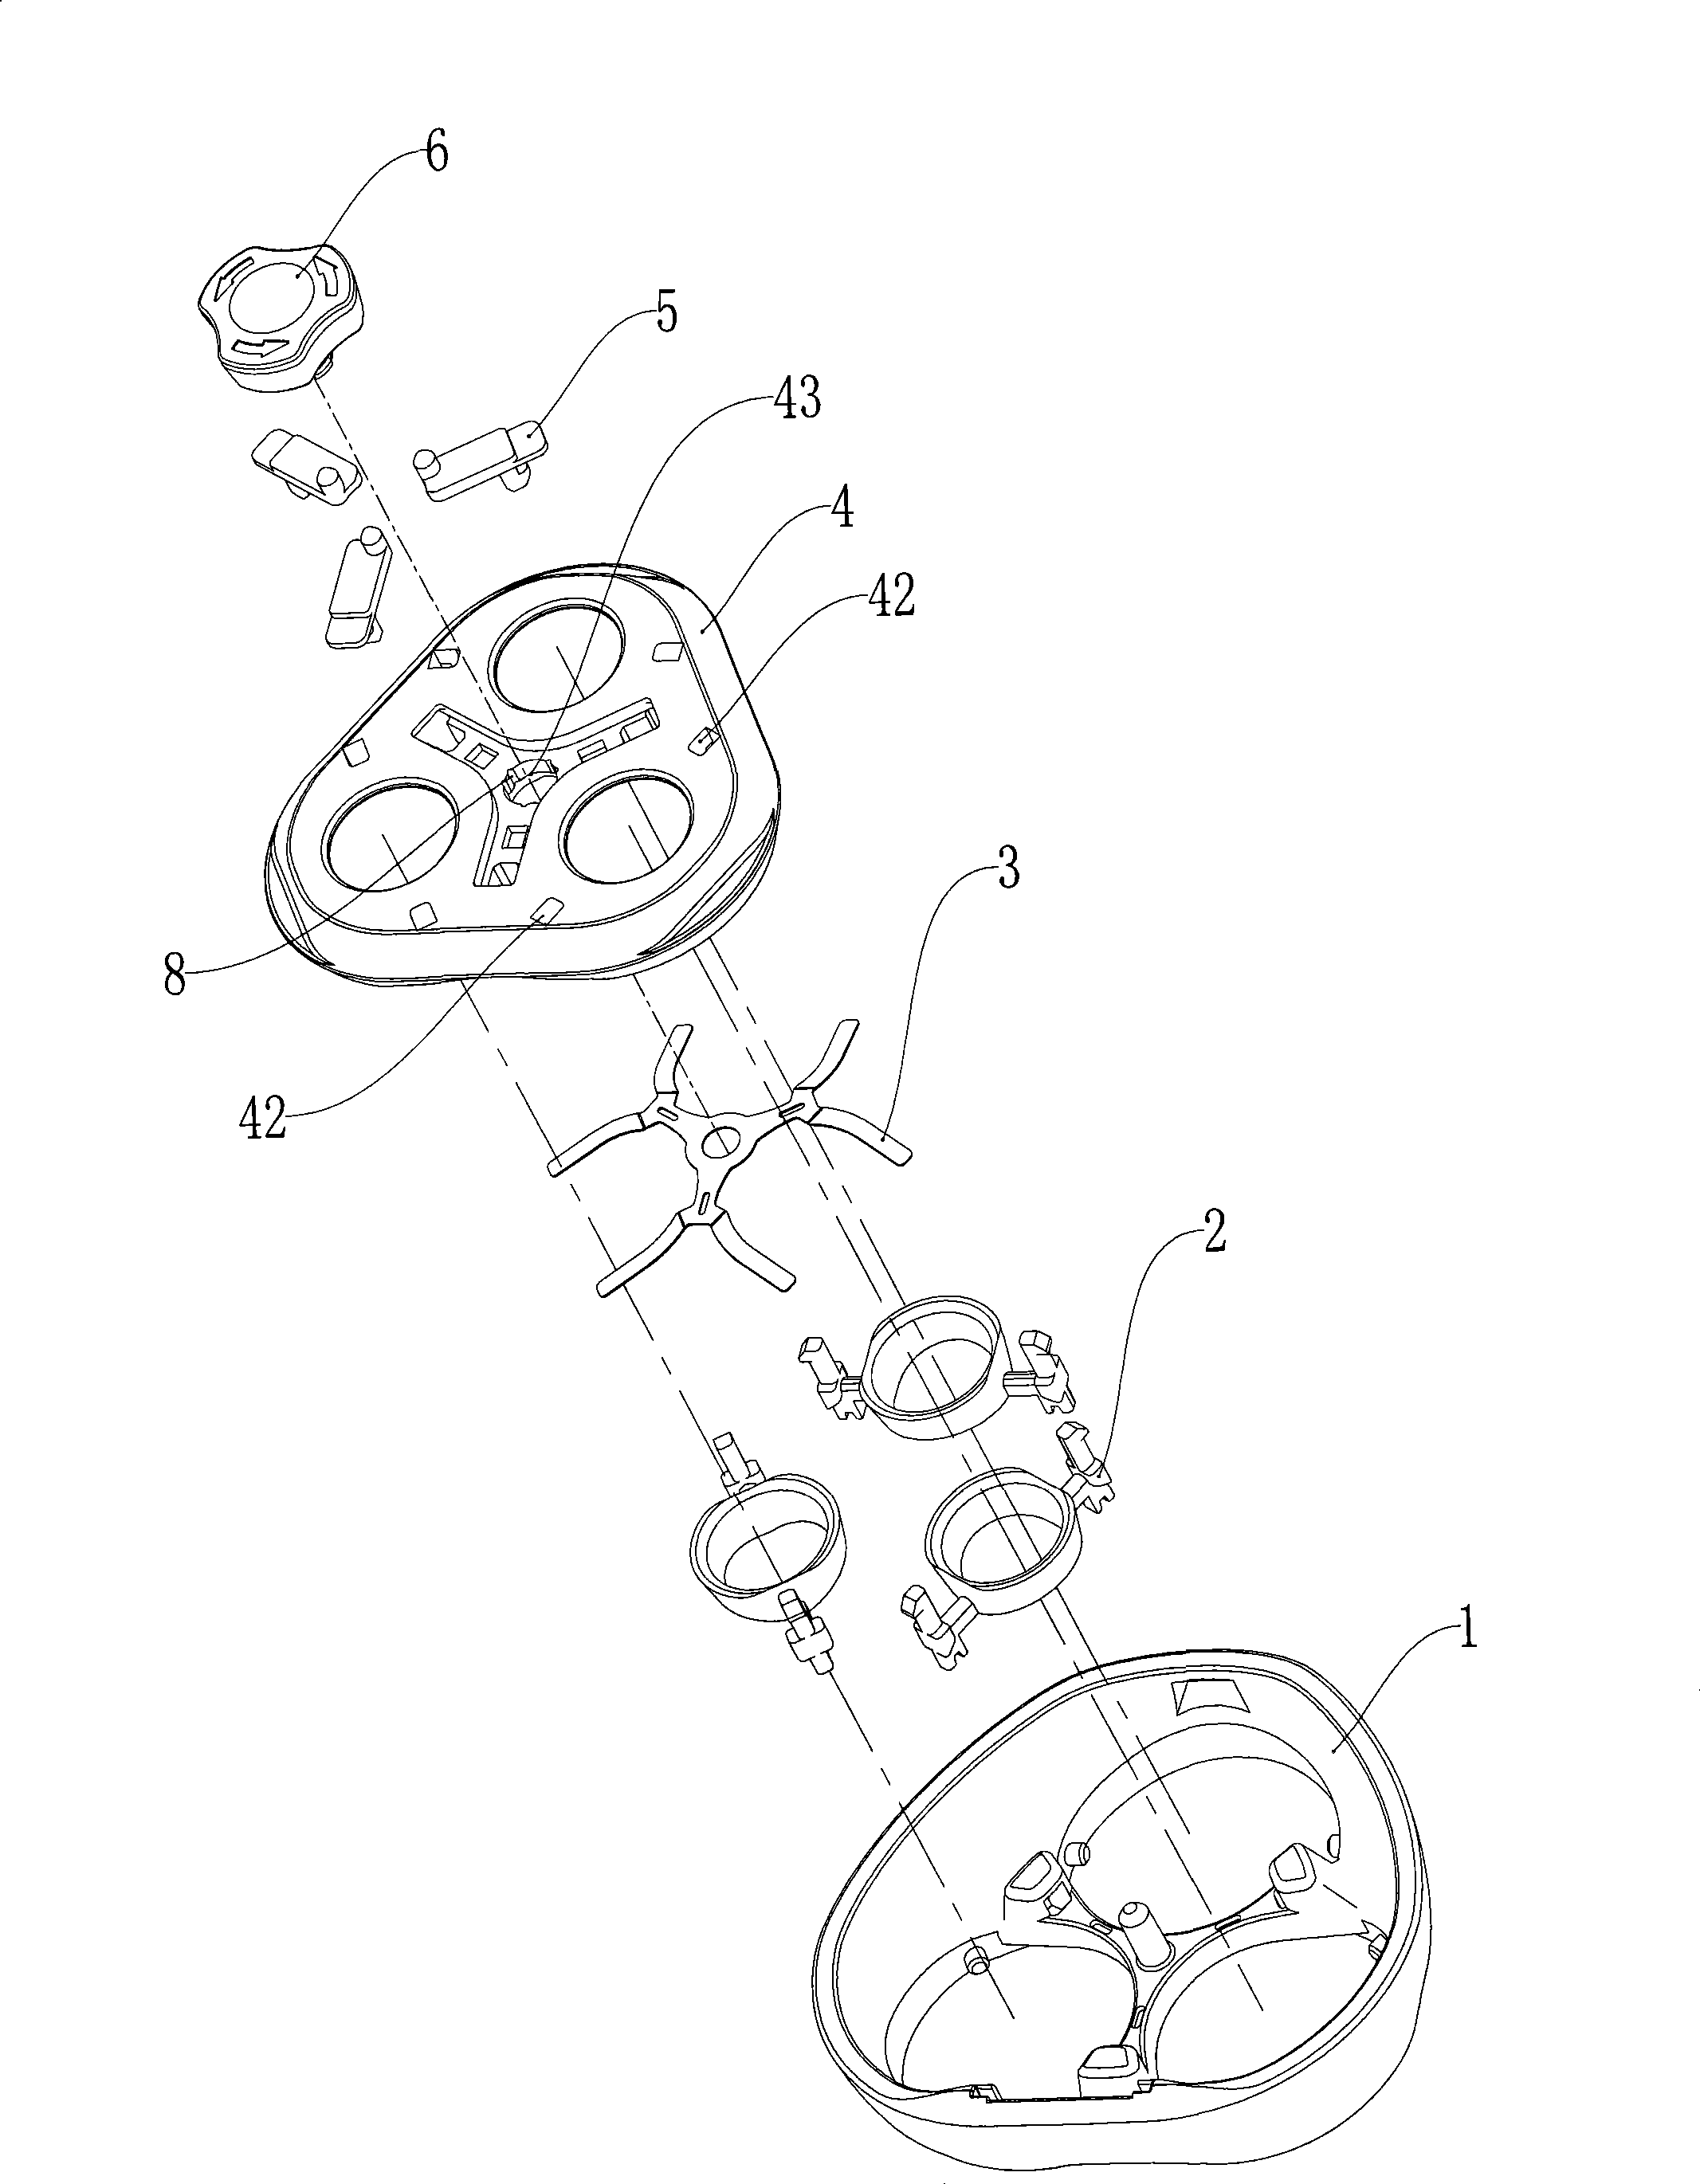 Elastic support apparatus of razor group for rotating shaver